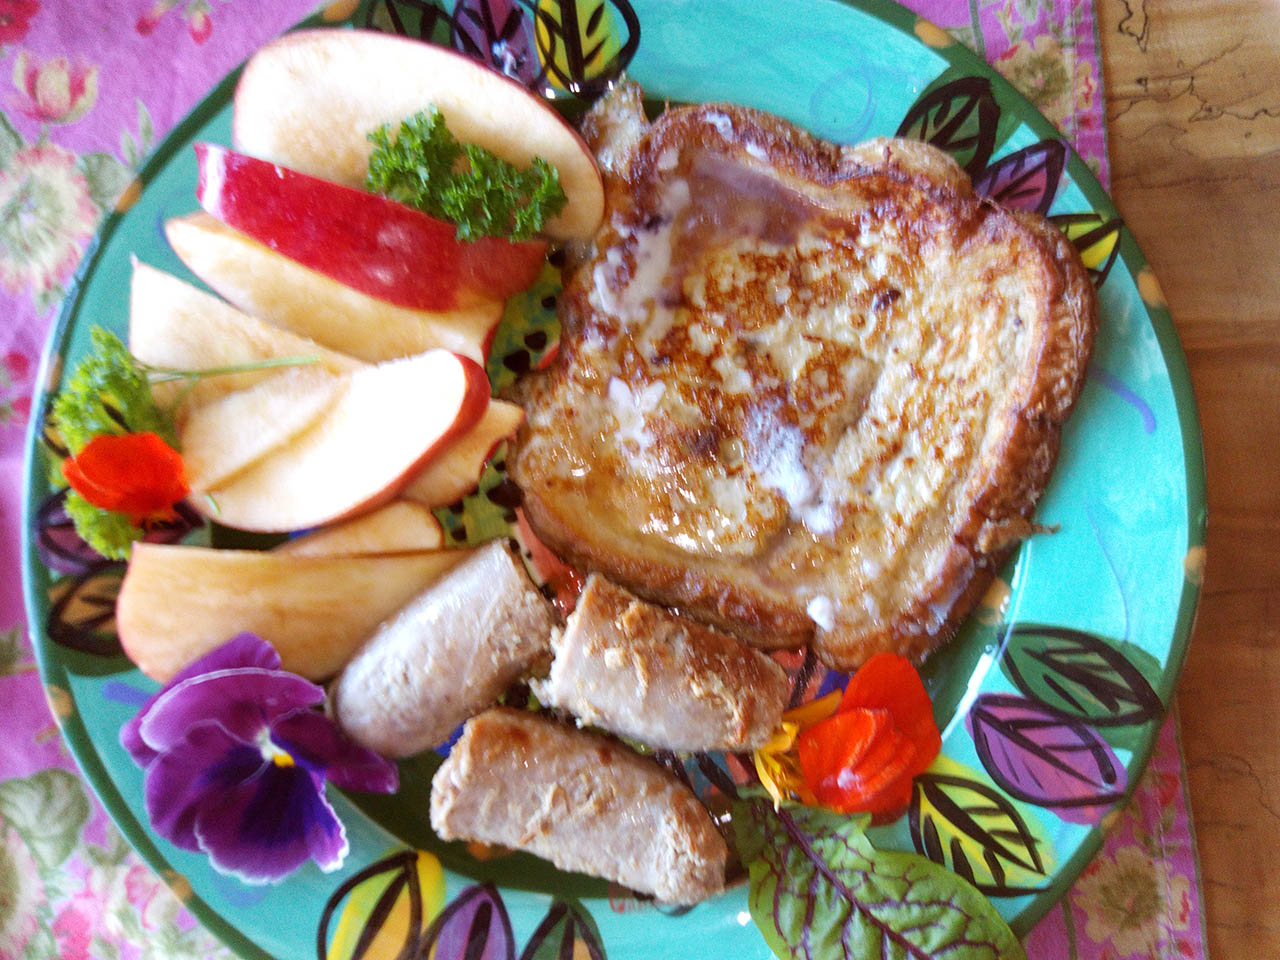 Plate of French toast, apples, sausage.